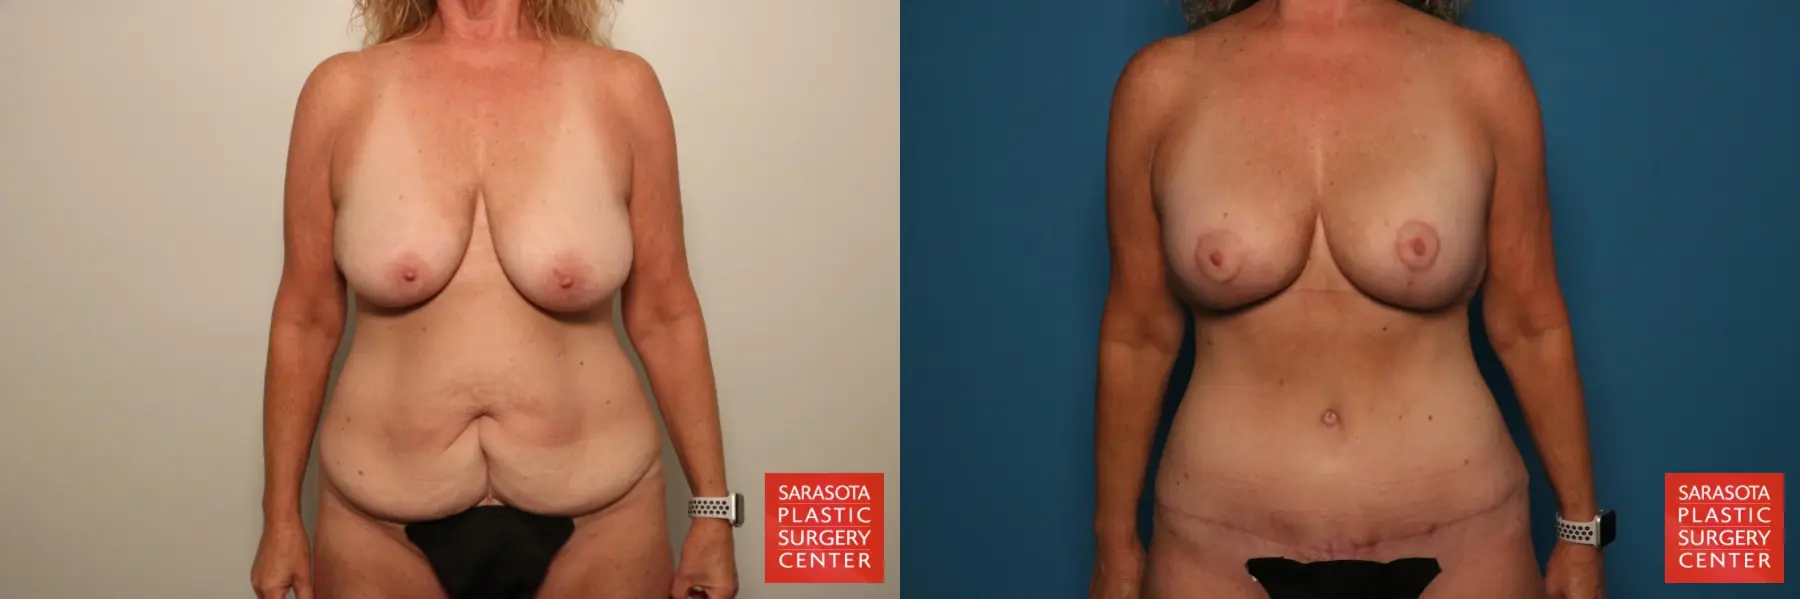 Body Lift: Patient 2 - Before and After  